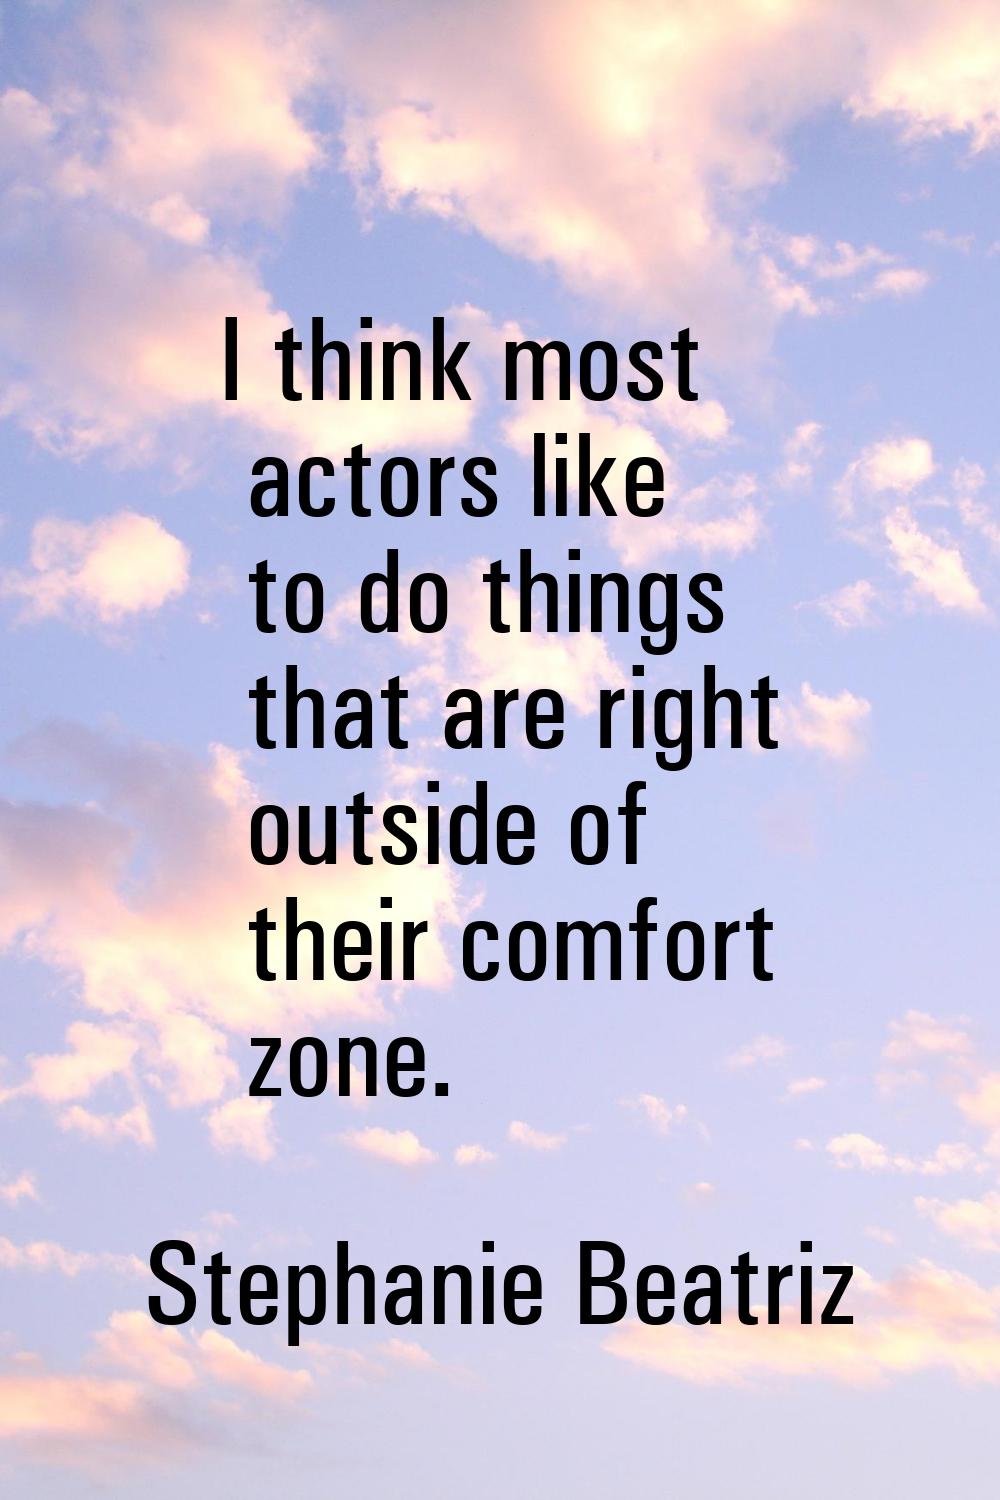 I think most actors like to do things that are right outside of their comfort zone.